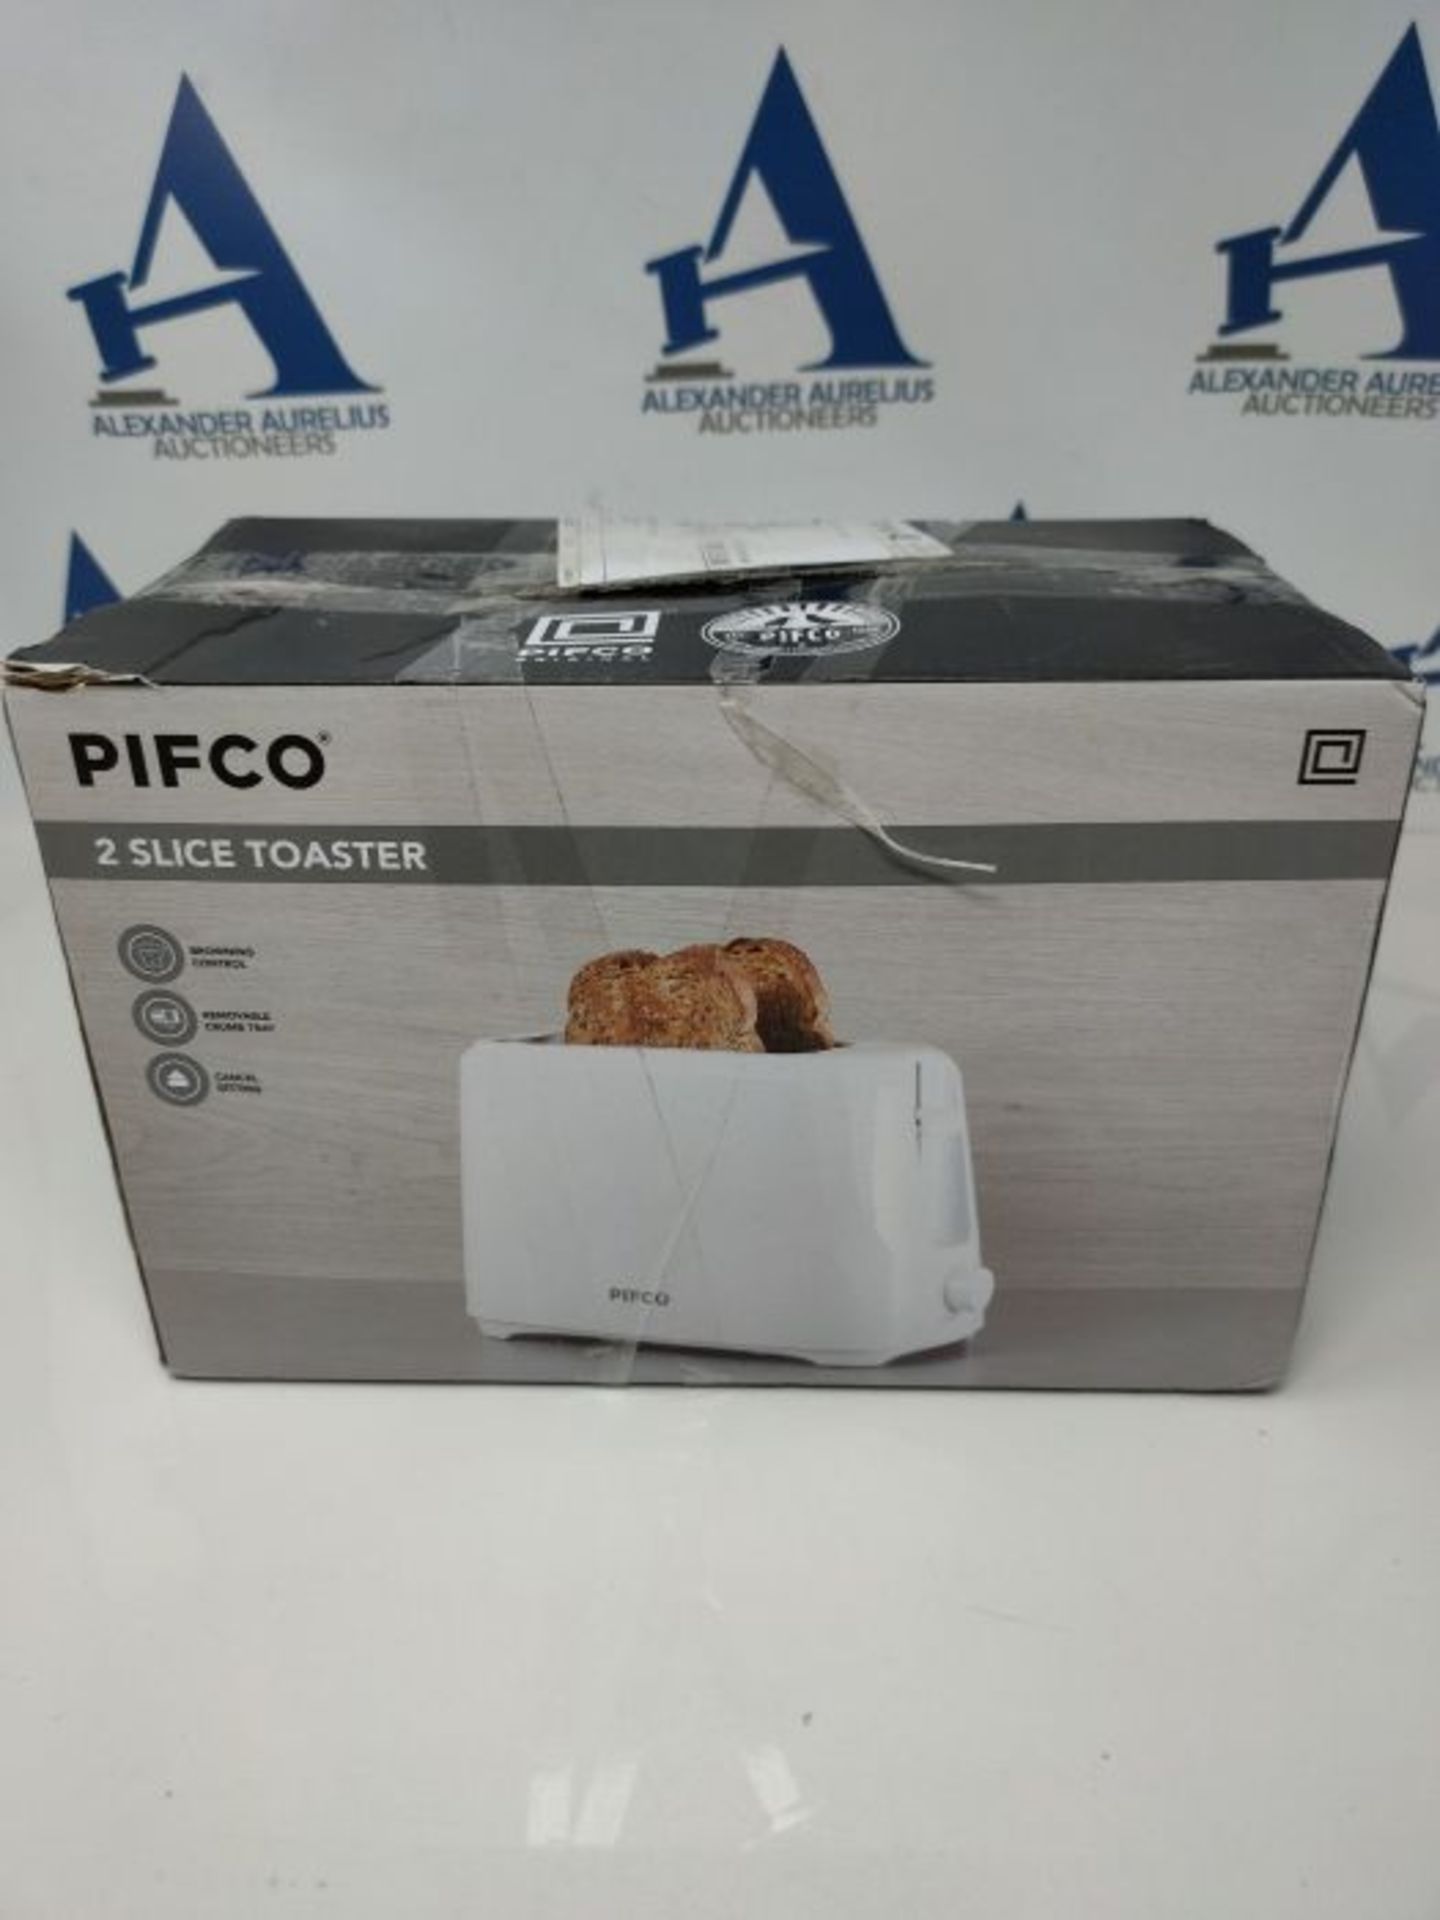 PIFCO White Toaster 2 Slice - With Browning Controls & Anti-Jam Function - Compact Des - Image 2 of 3